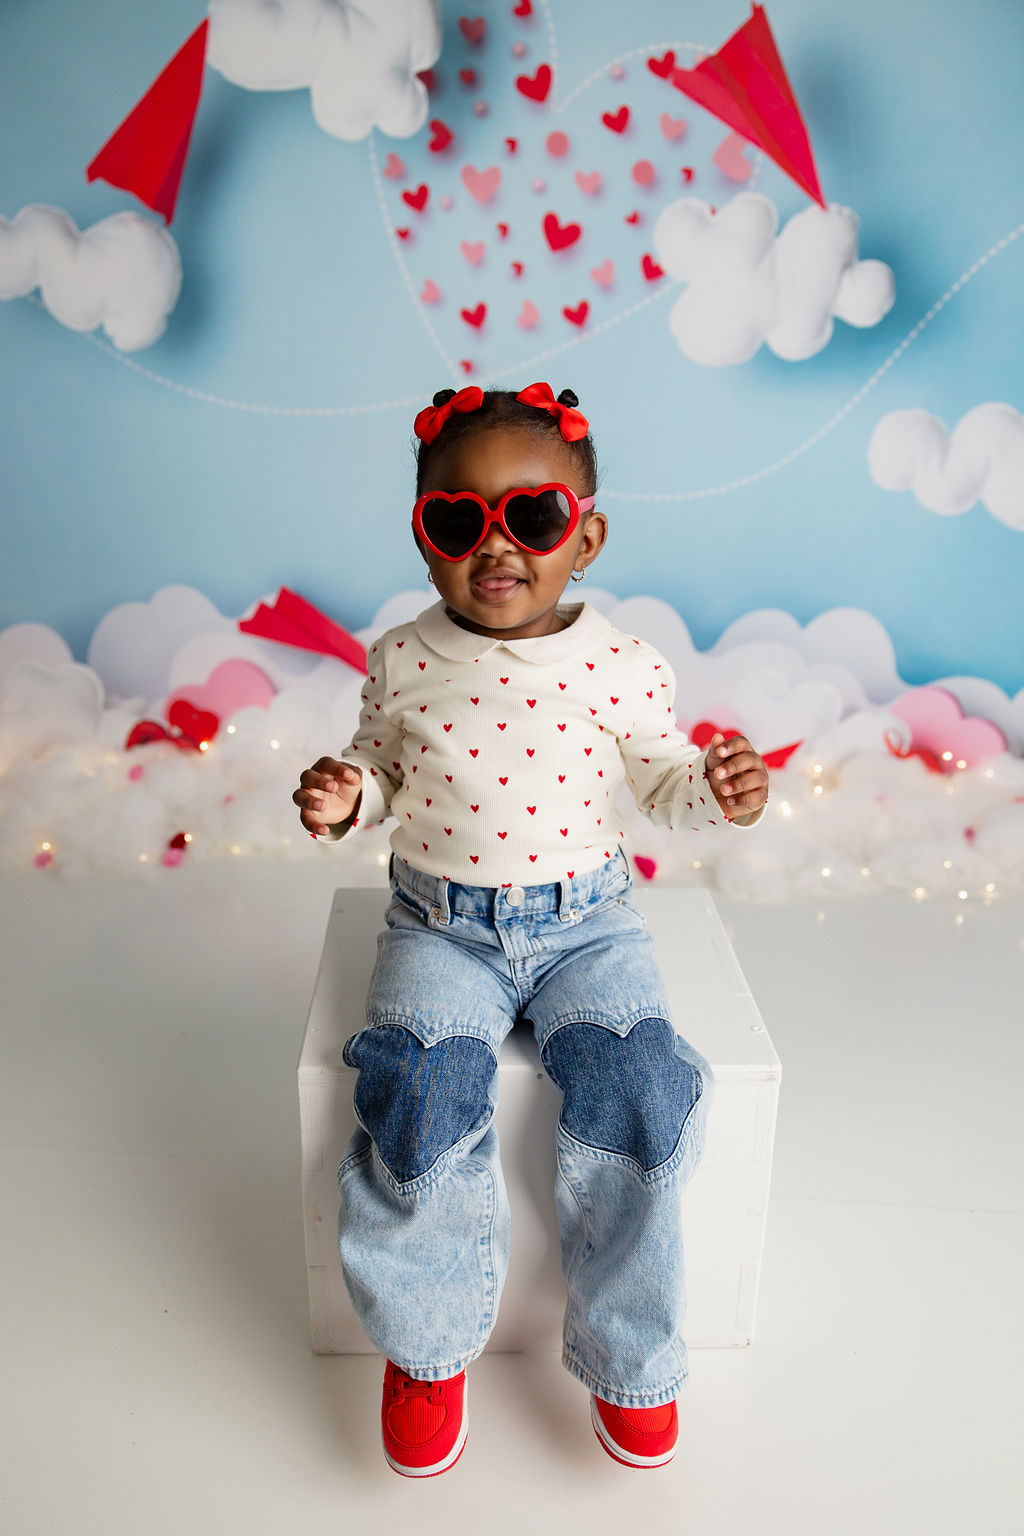 A toddler girl in red heart sunglasses sits on a white box in a studio smiling after visiting ruckus and glee